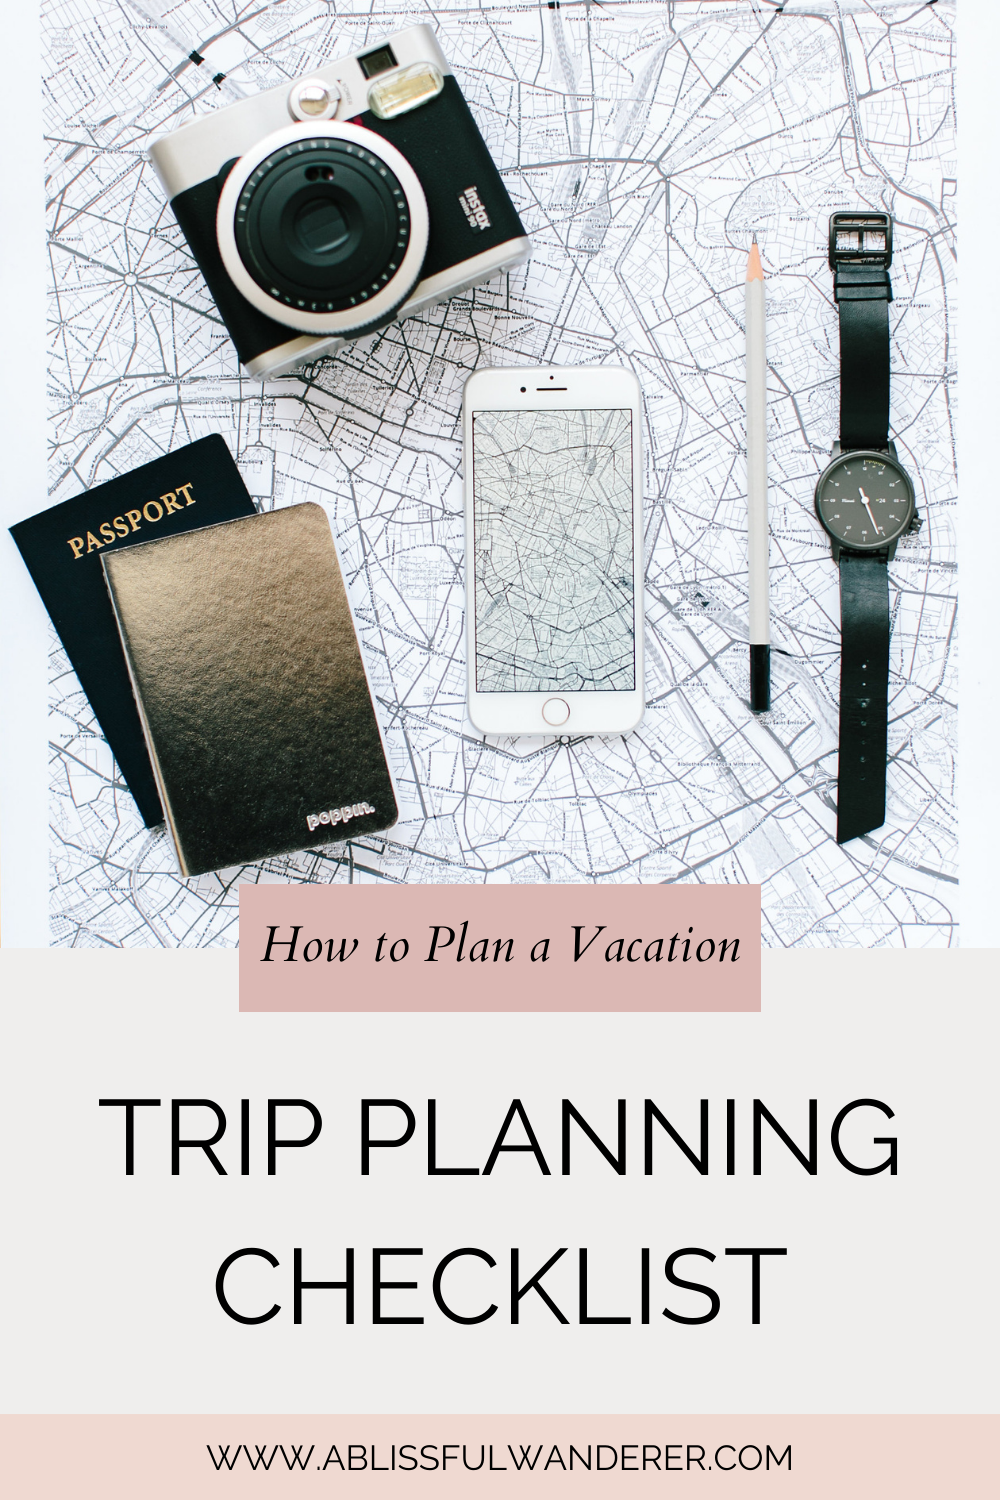 Stress Free Trip Planning Checklist: How to Plan a Vacation on a Budget pin 2 with map, iphone, and camera photo